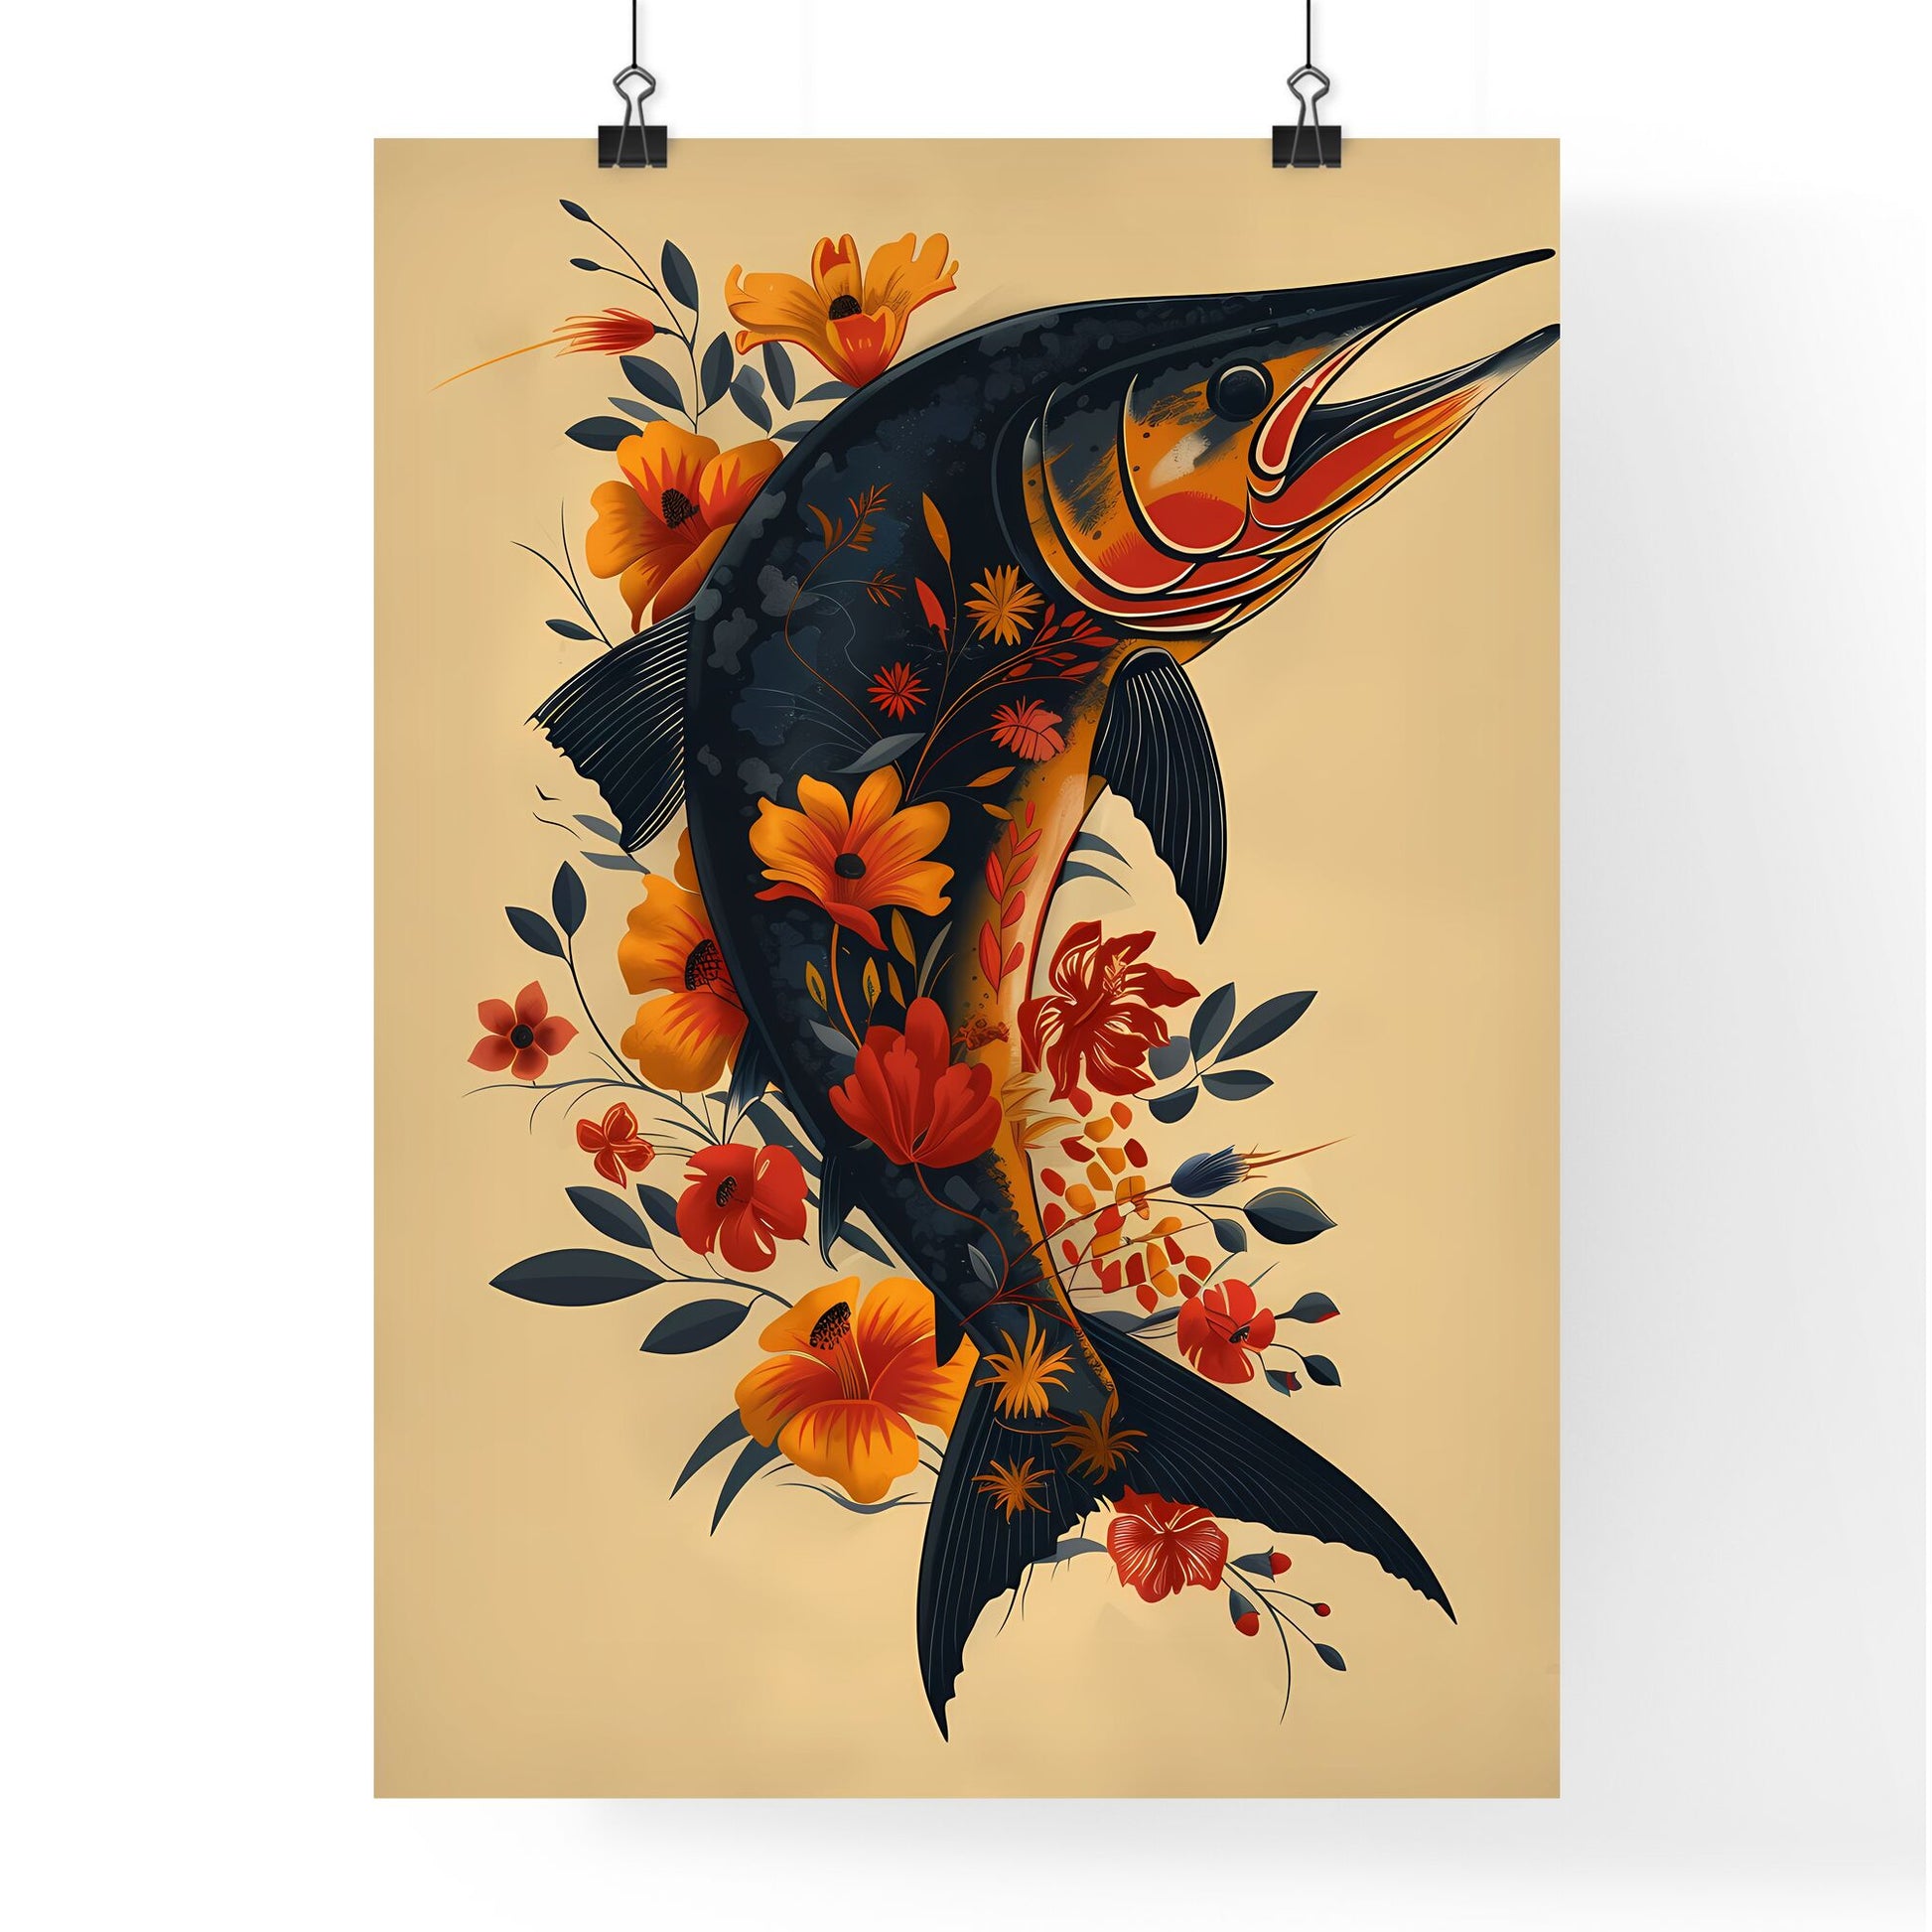 Vibrant Tropical Marlin Art Print: Elegant Silhouette with Floral Adornment in Offshore Sportsman Arch Shape Default Title